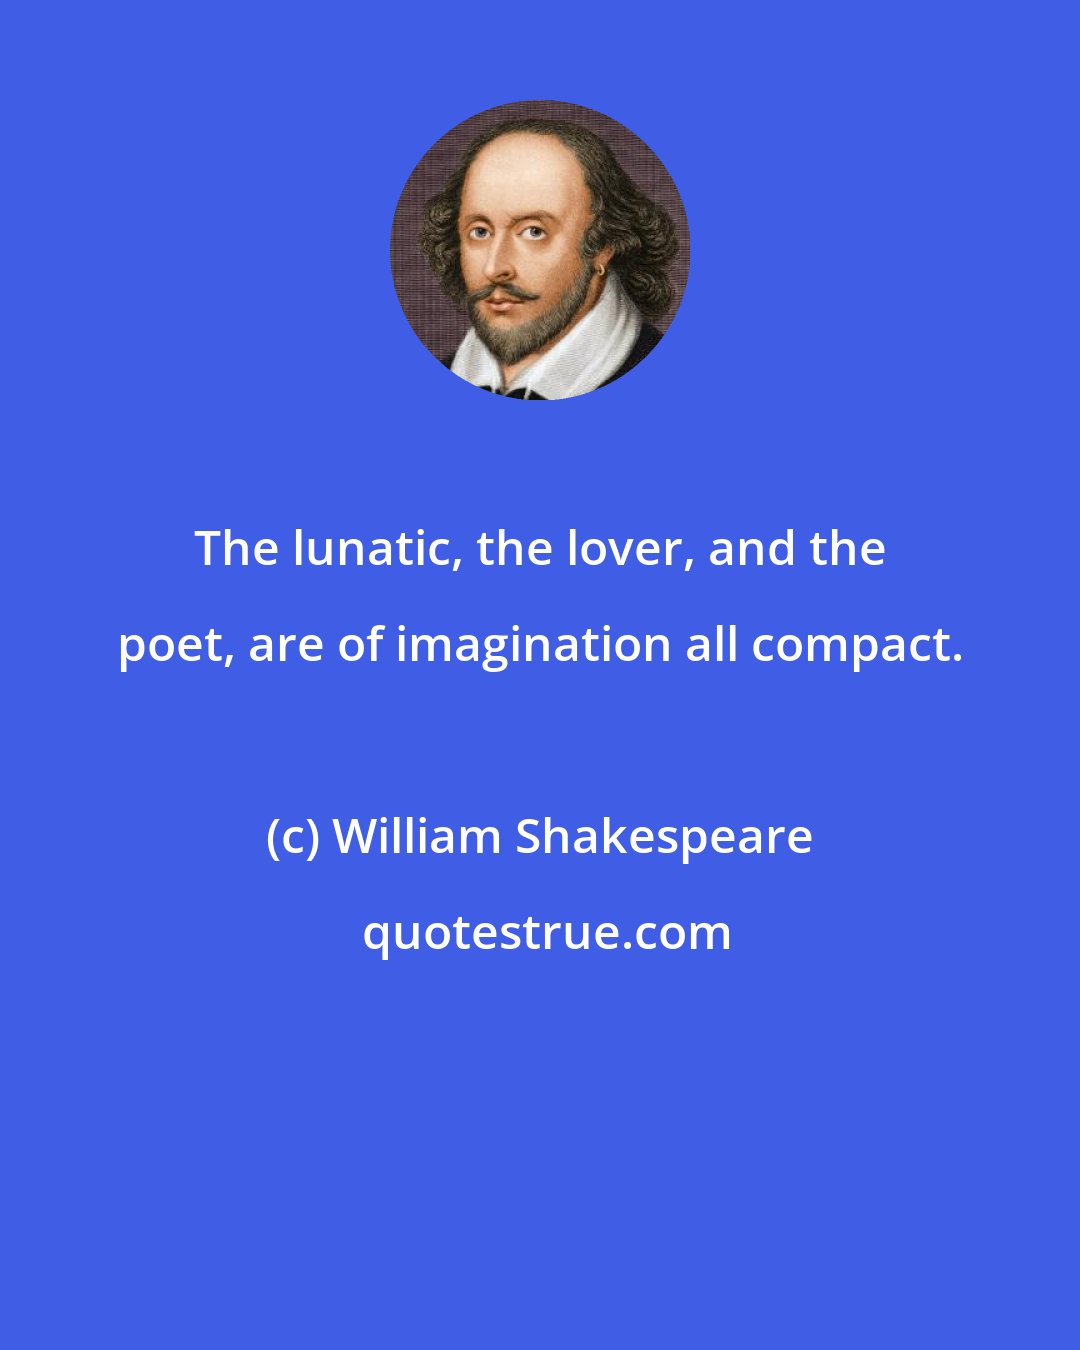 William Shakespeare: The lunatic, the lover, and the poet, are of imagination all compact.